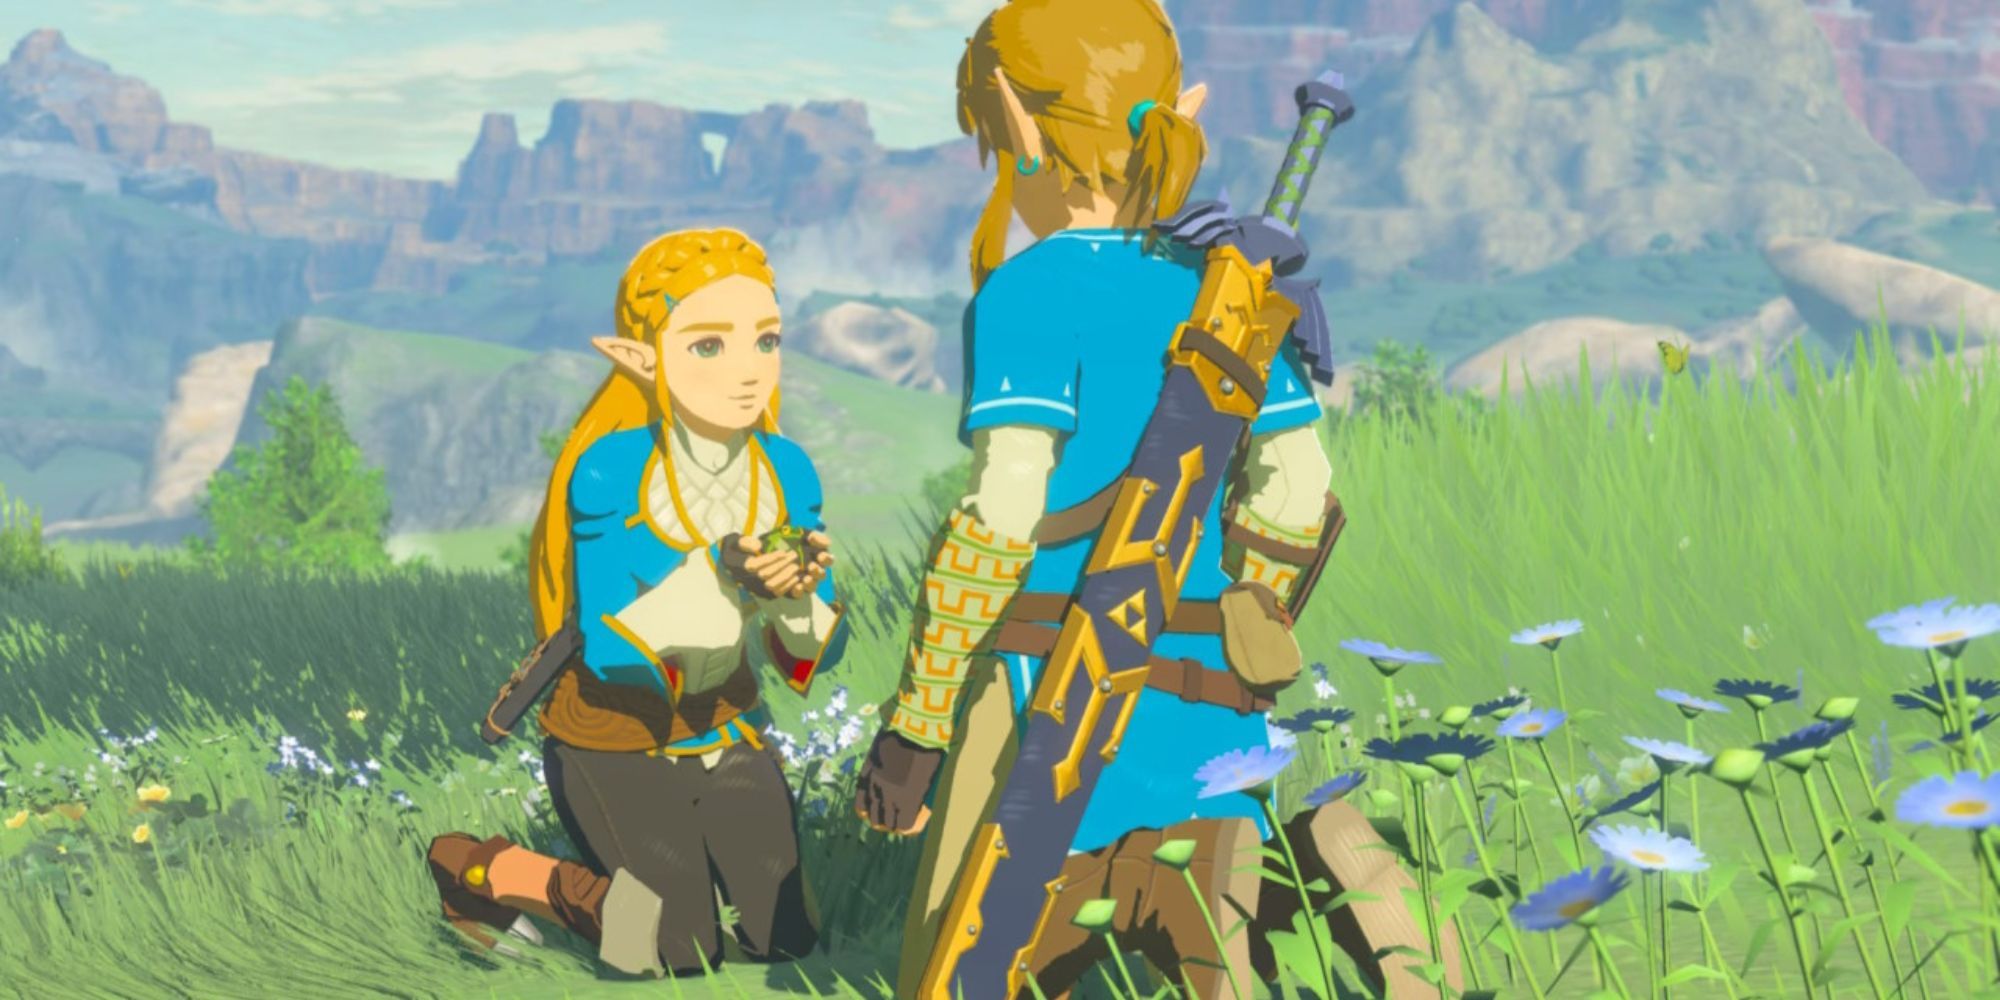 Zelda holds a frog in her hands while kneeling in the grass with Link